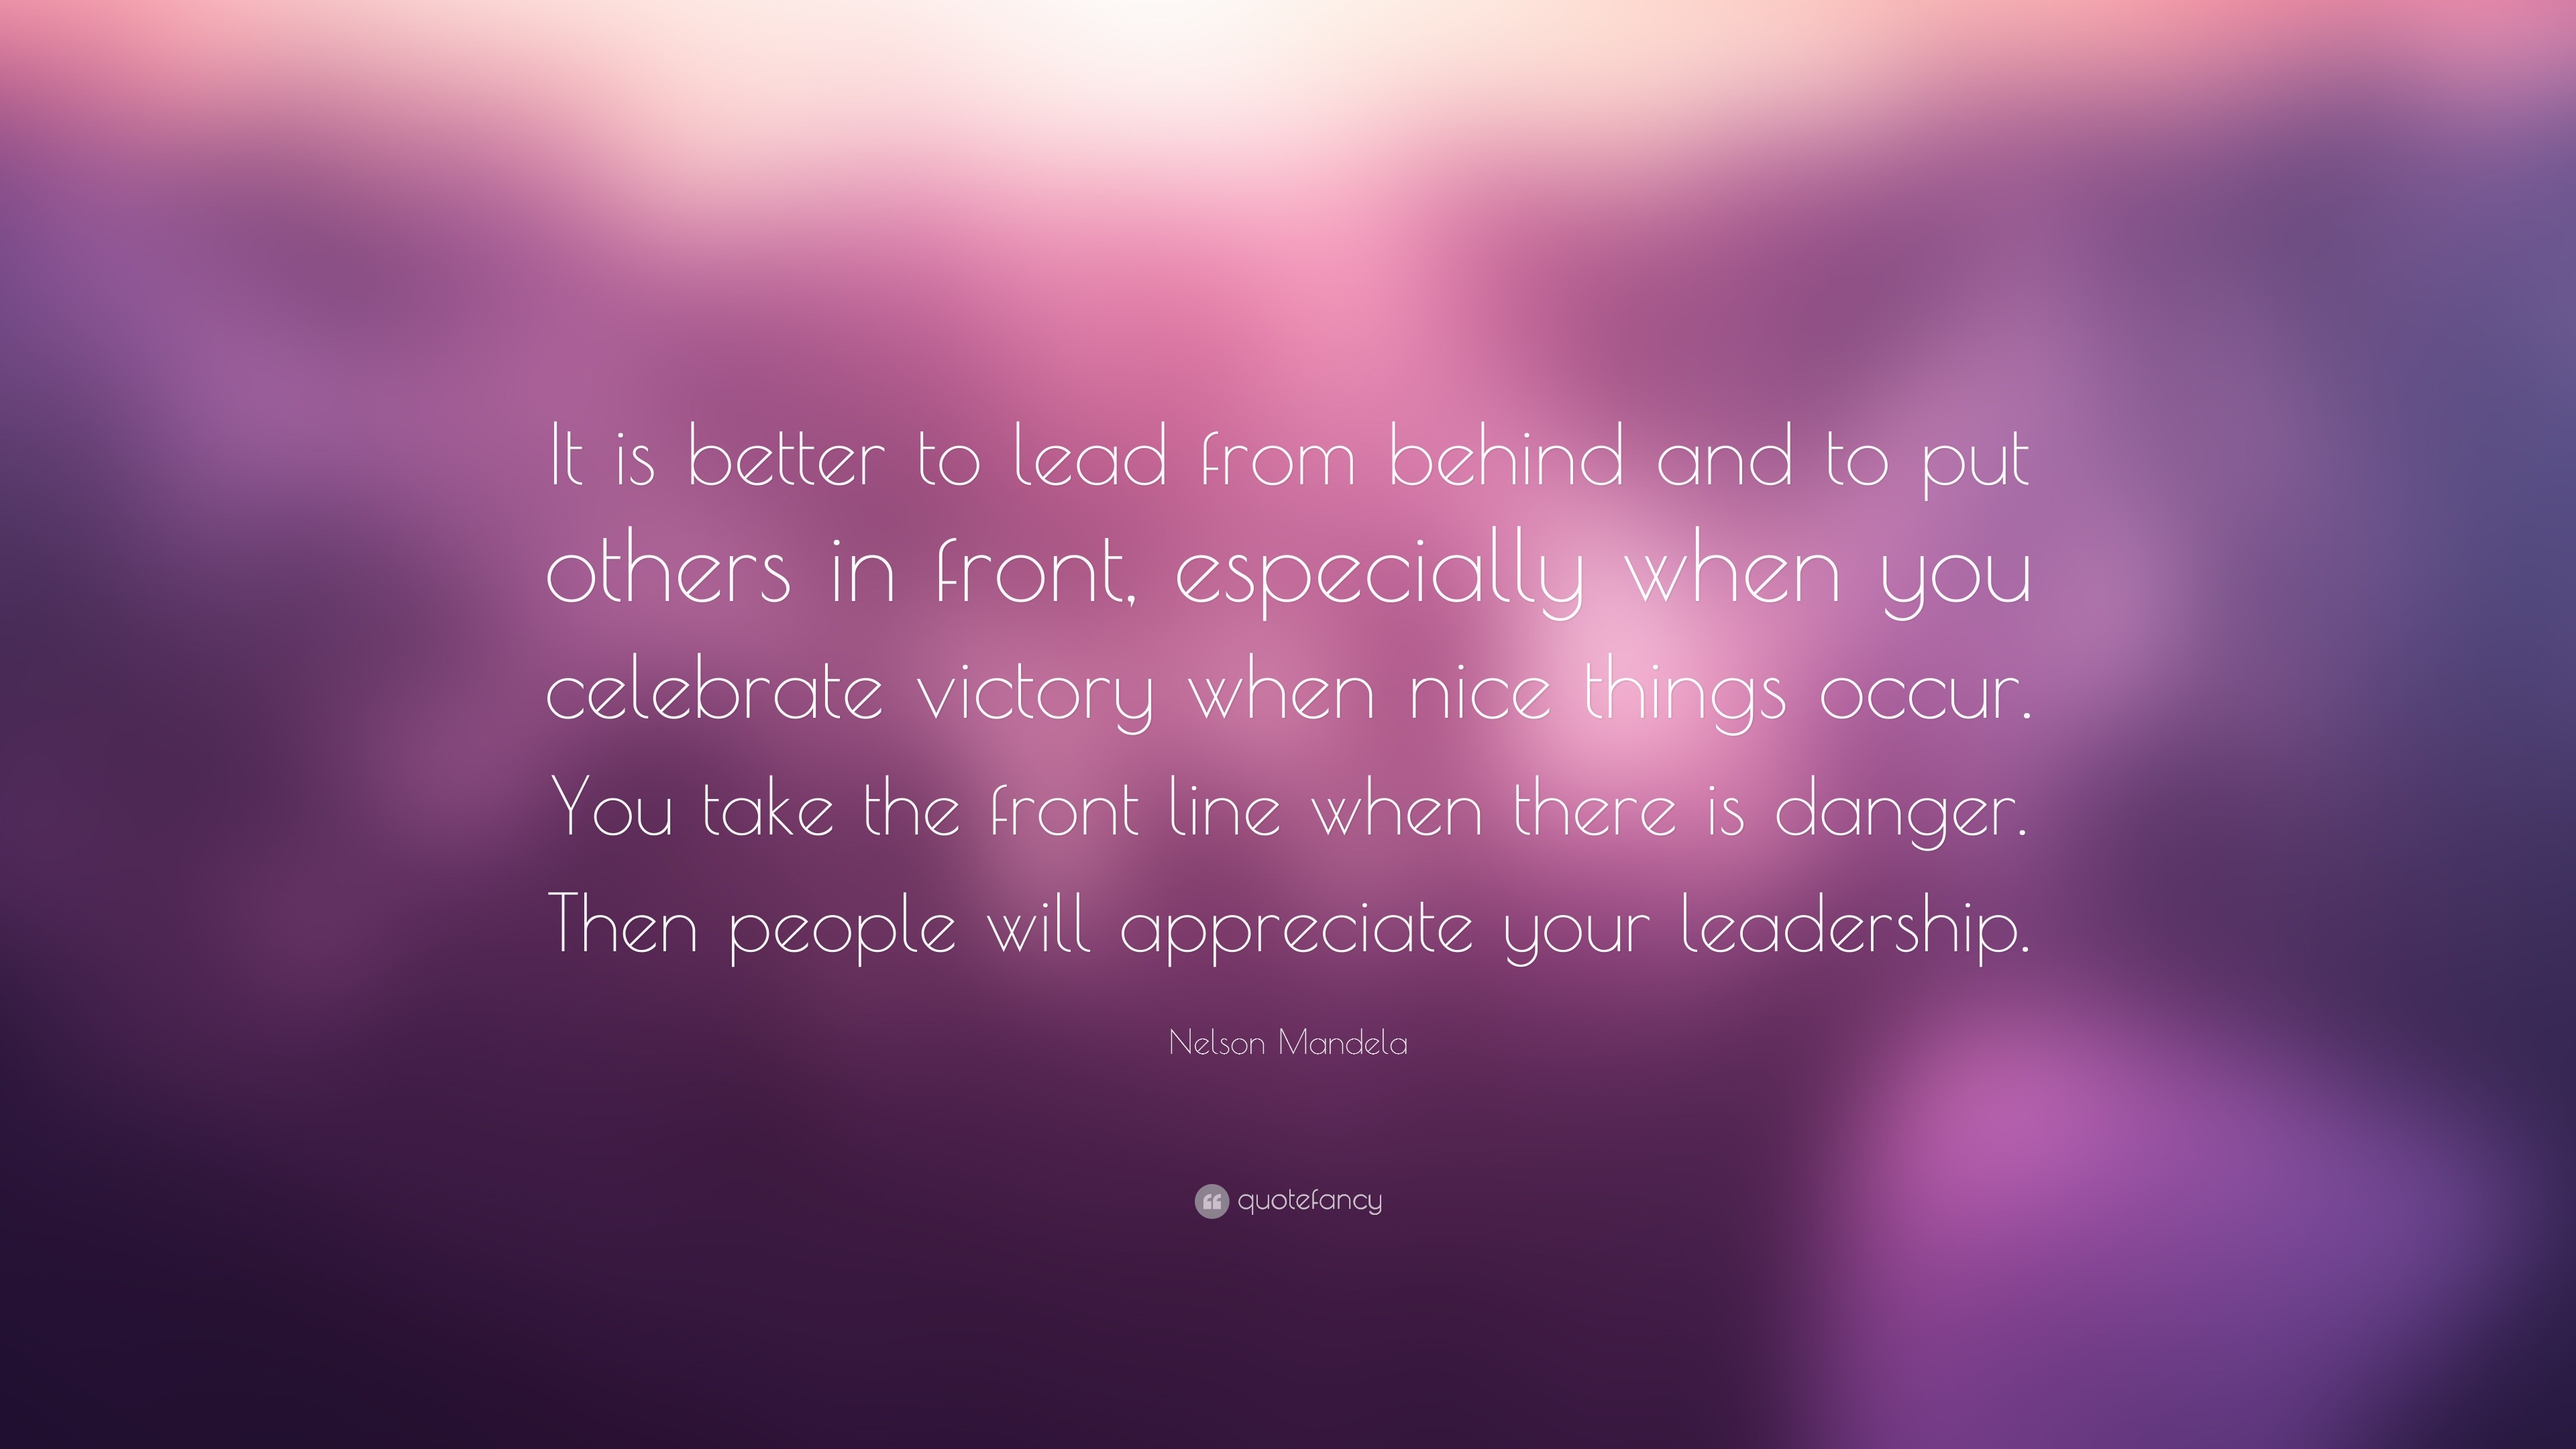 Nelson Mandela Quote: “It is better to lead from behind and to put ...